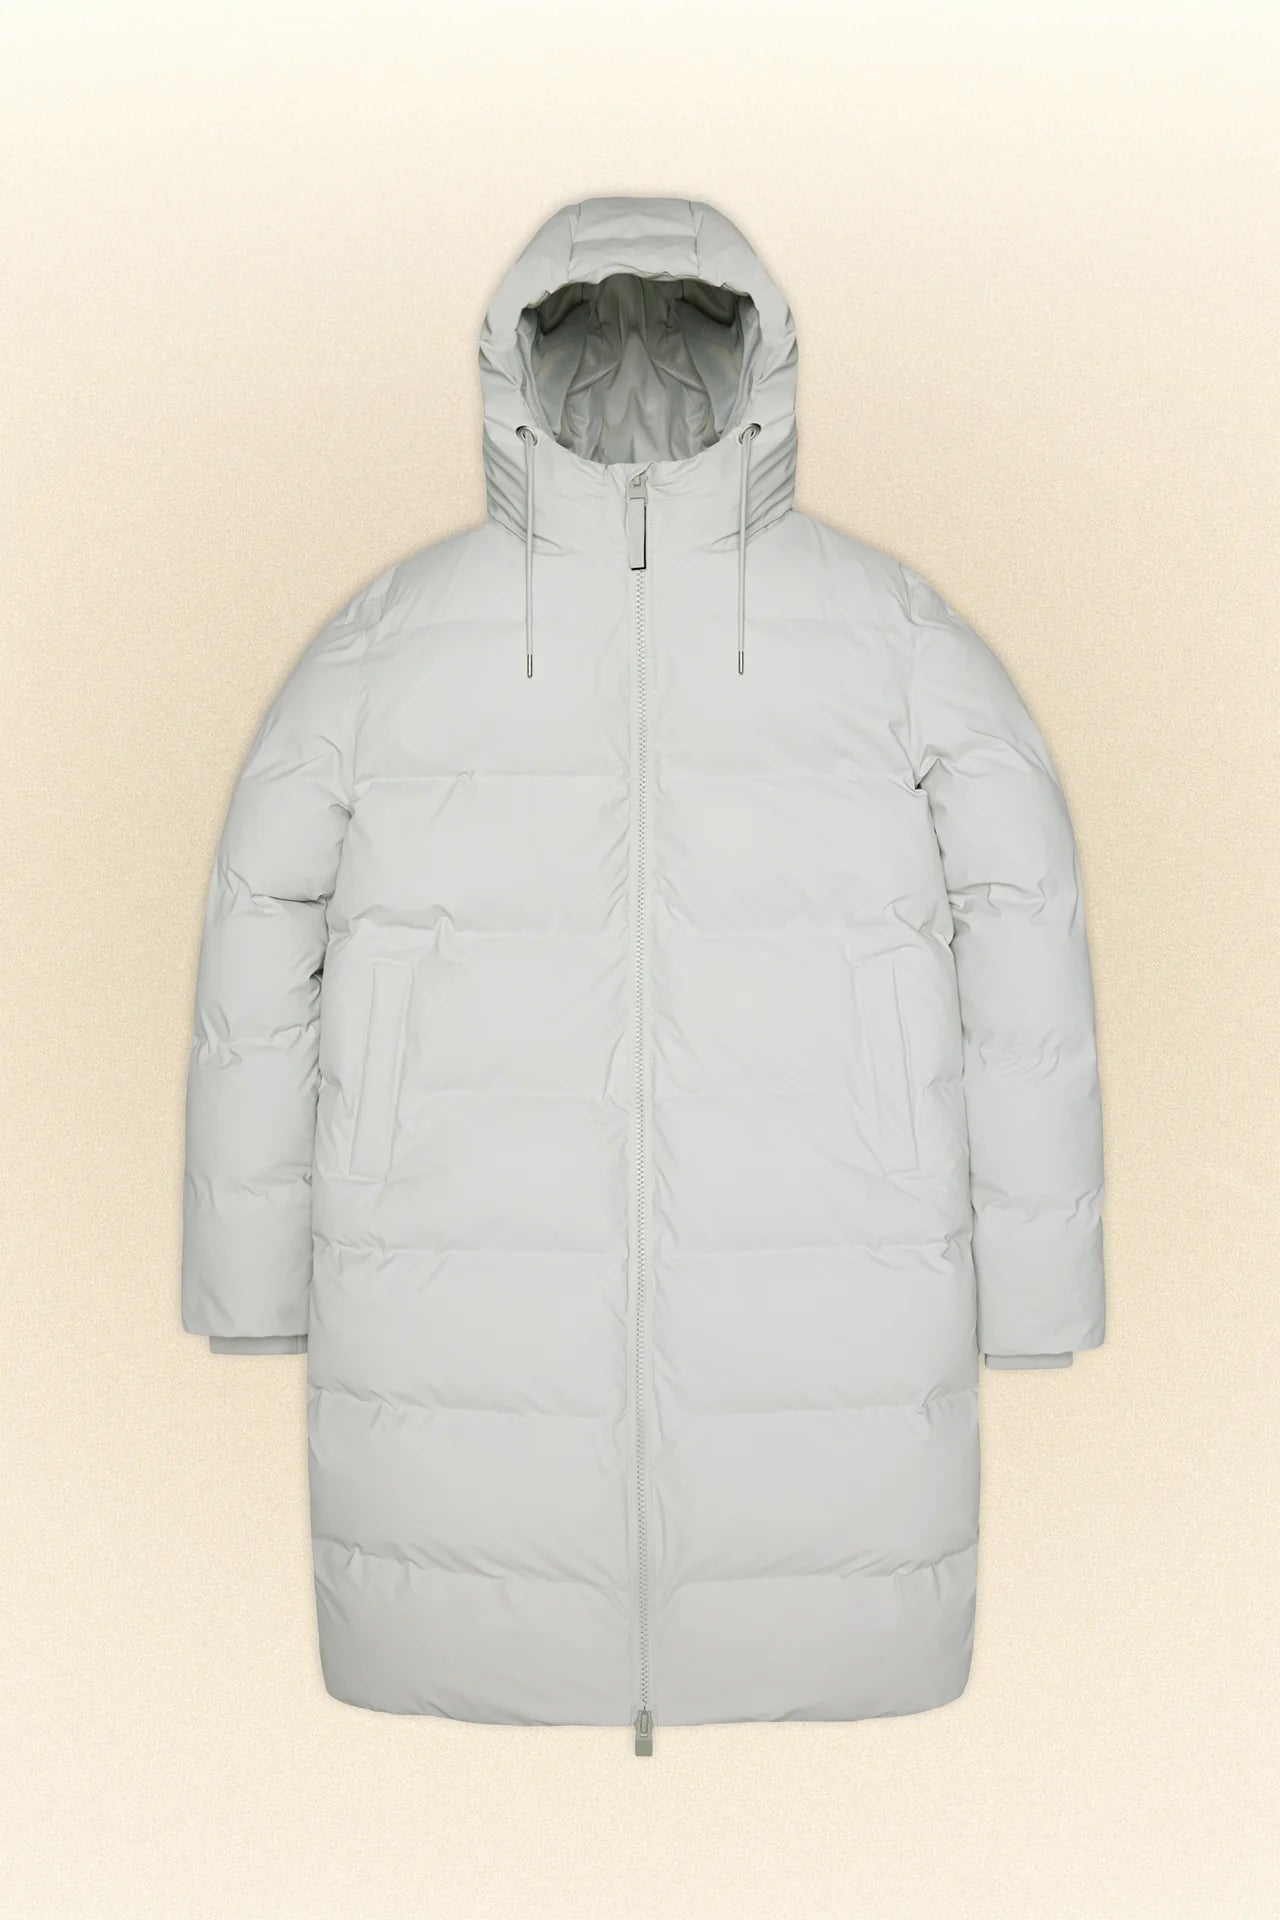 An Alta Long Puffer Jacket with hood on a white background.